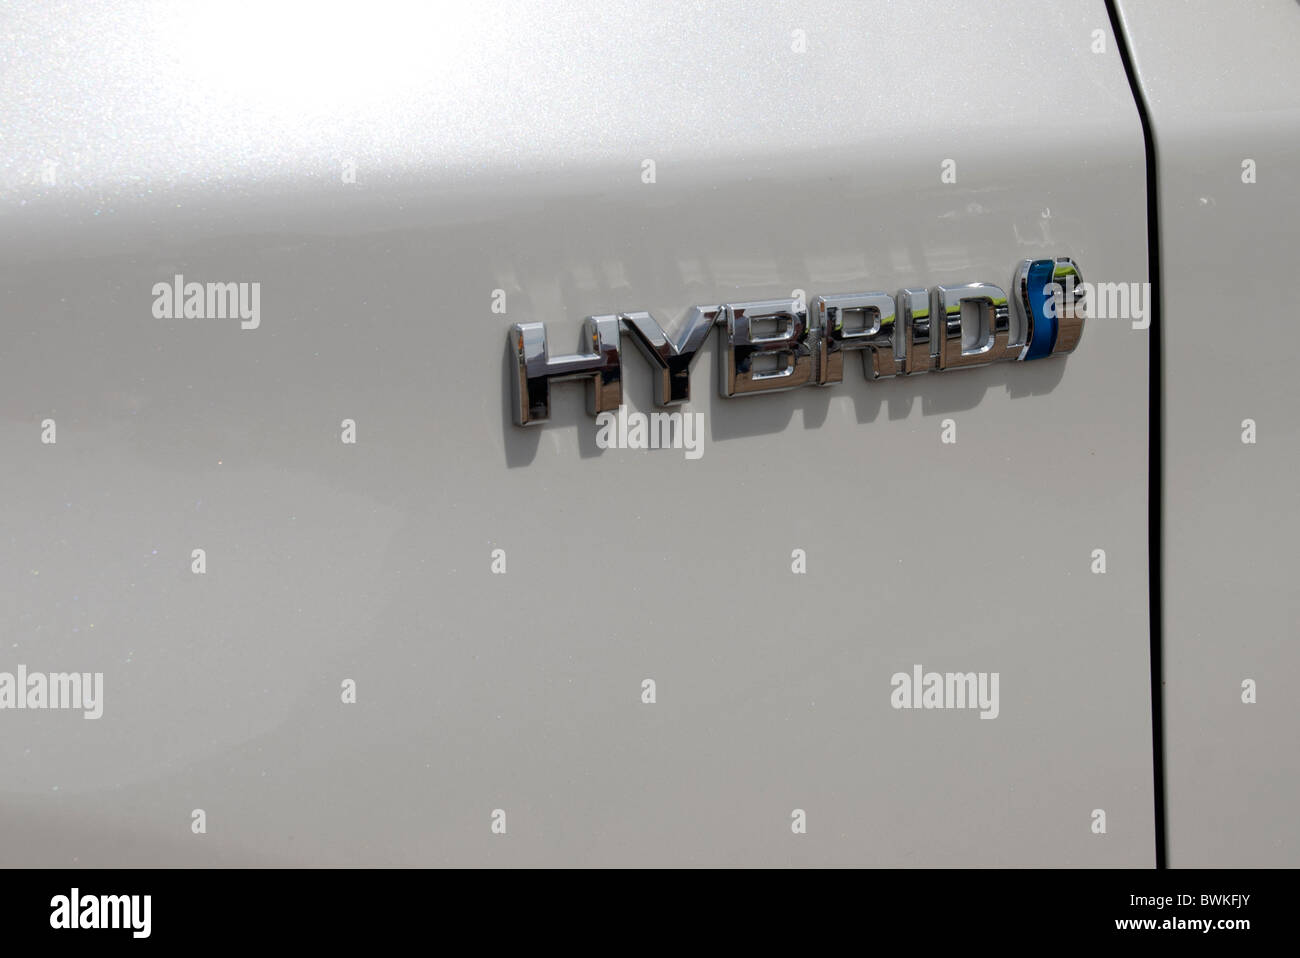 hybrid logo on the side of a car. Stock Photo